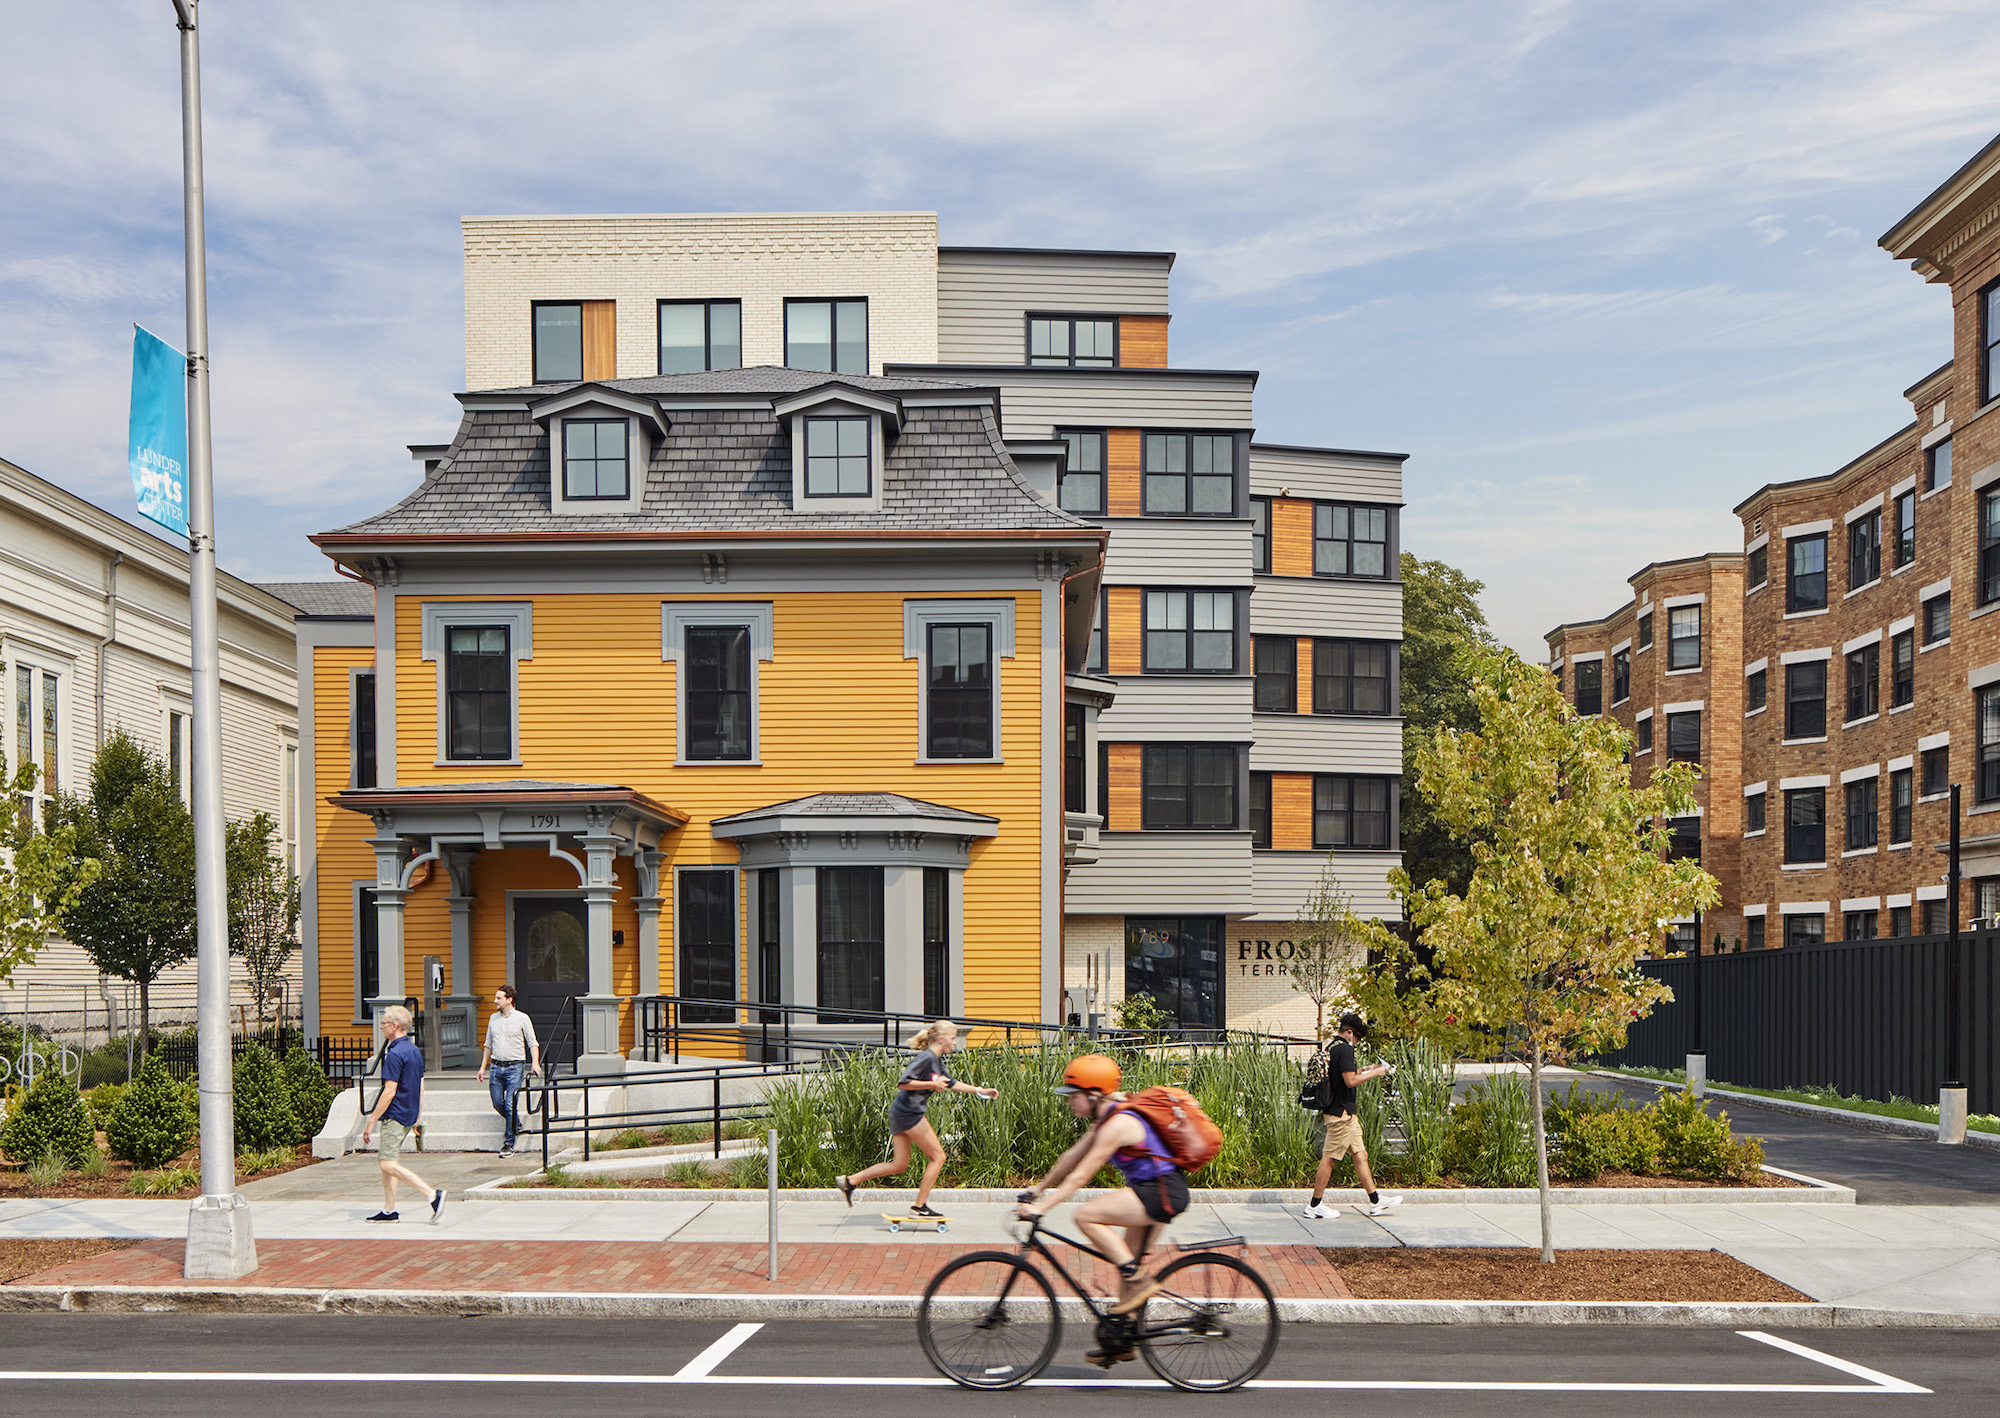 Frost Terrace affordable housing project in Cambridge, Mass. Photo © Robert Benson Photography; Before: Bruner/Cott